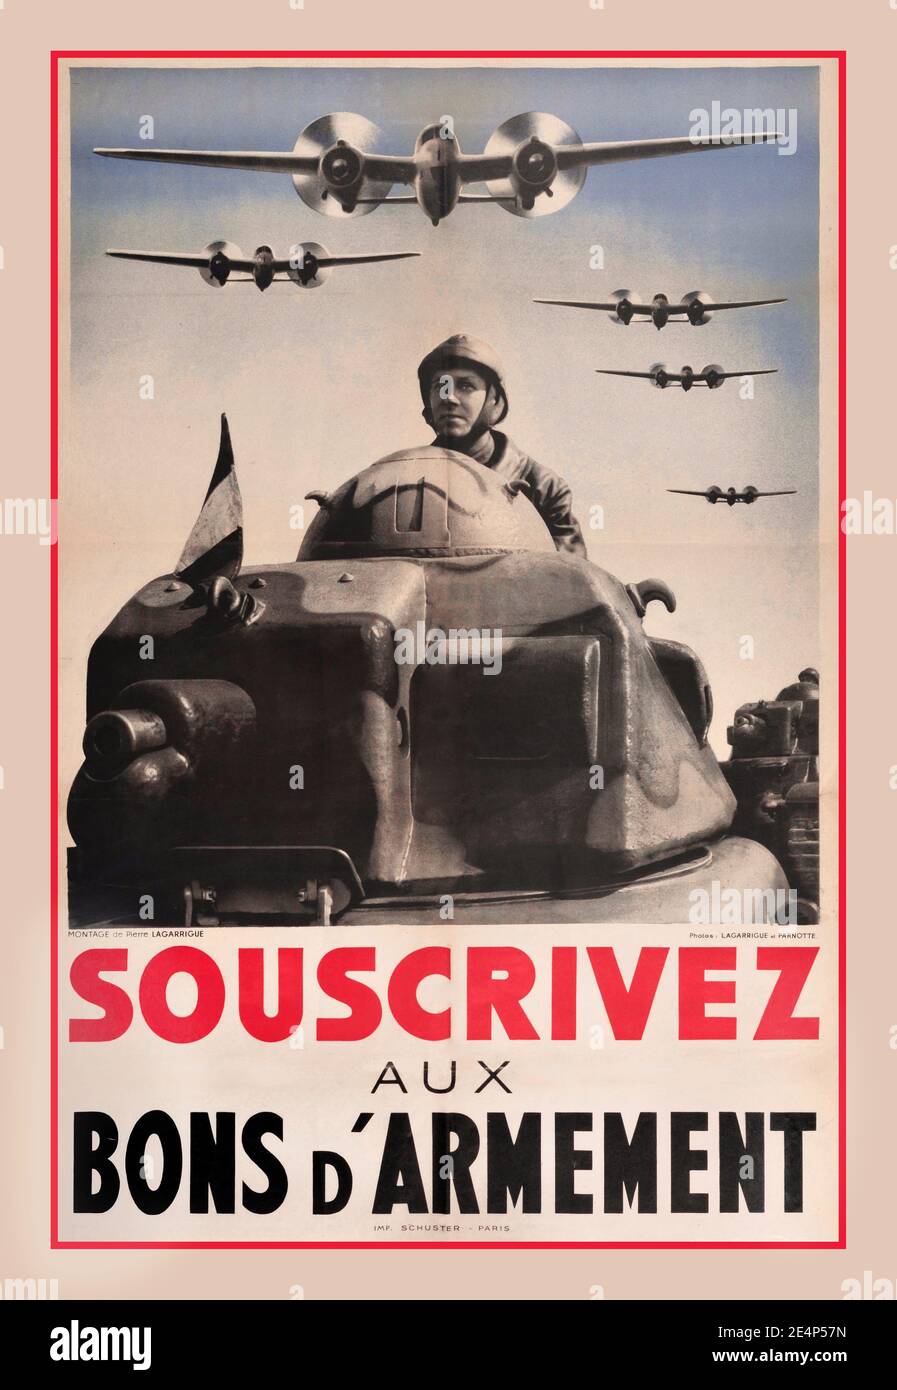 French World War Two appeals propaganda poster: ‘Subscribe to Armament Bonds’ - Souscivez aux bons d'Armement. photomontage by Pierre La Garrigue of French World War II tanks with bomber planes flying overhead. Photo by LaGarrigue and Parnotte, Printed by Schuster, Paris. Country of issue: France, designer: Pierre La Garrigue, 1939 WW2 Second World War Stock Photo